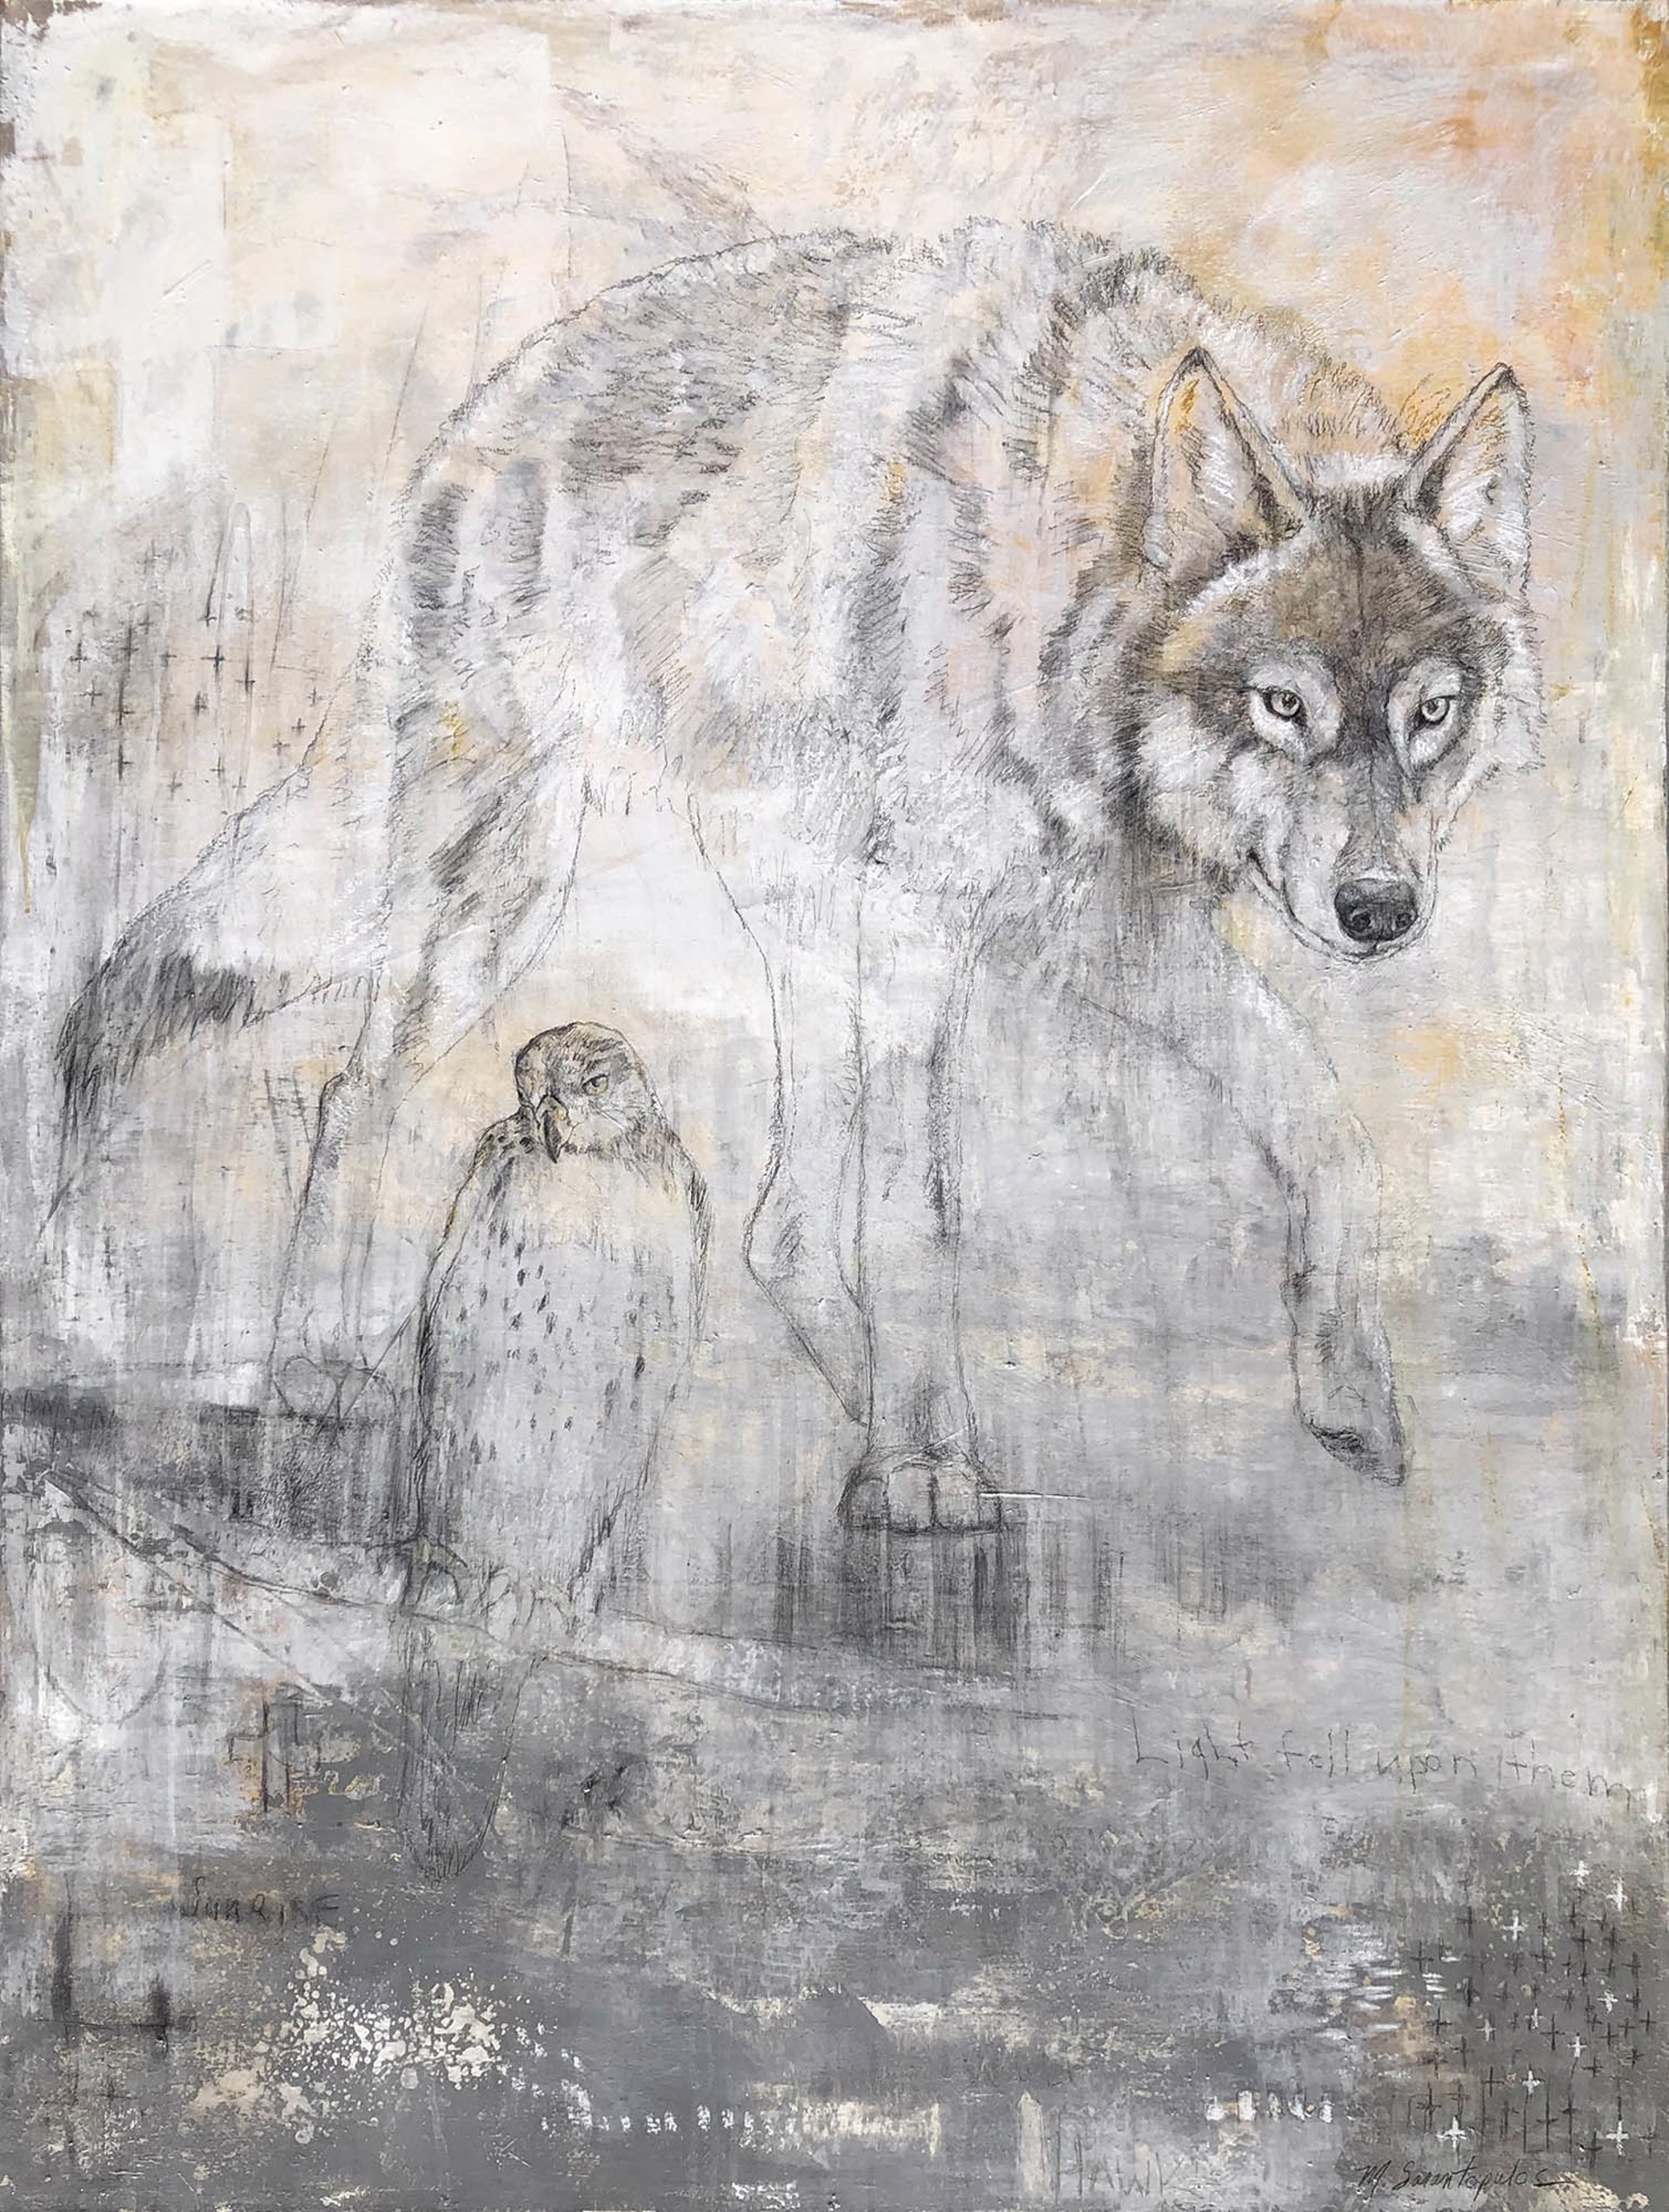 Original Mixed Media Painting Featuring A Wolf And Hawk Sketched Over Abstract Gray Background